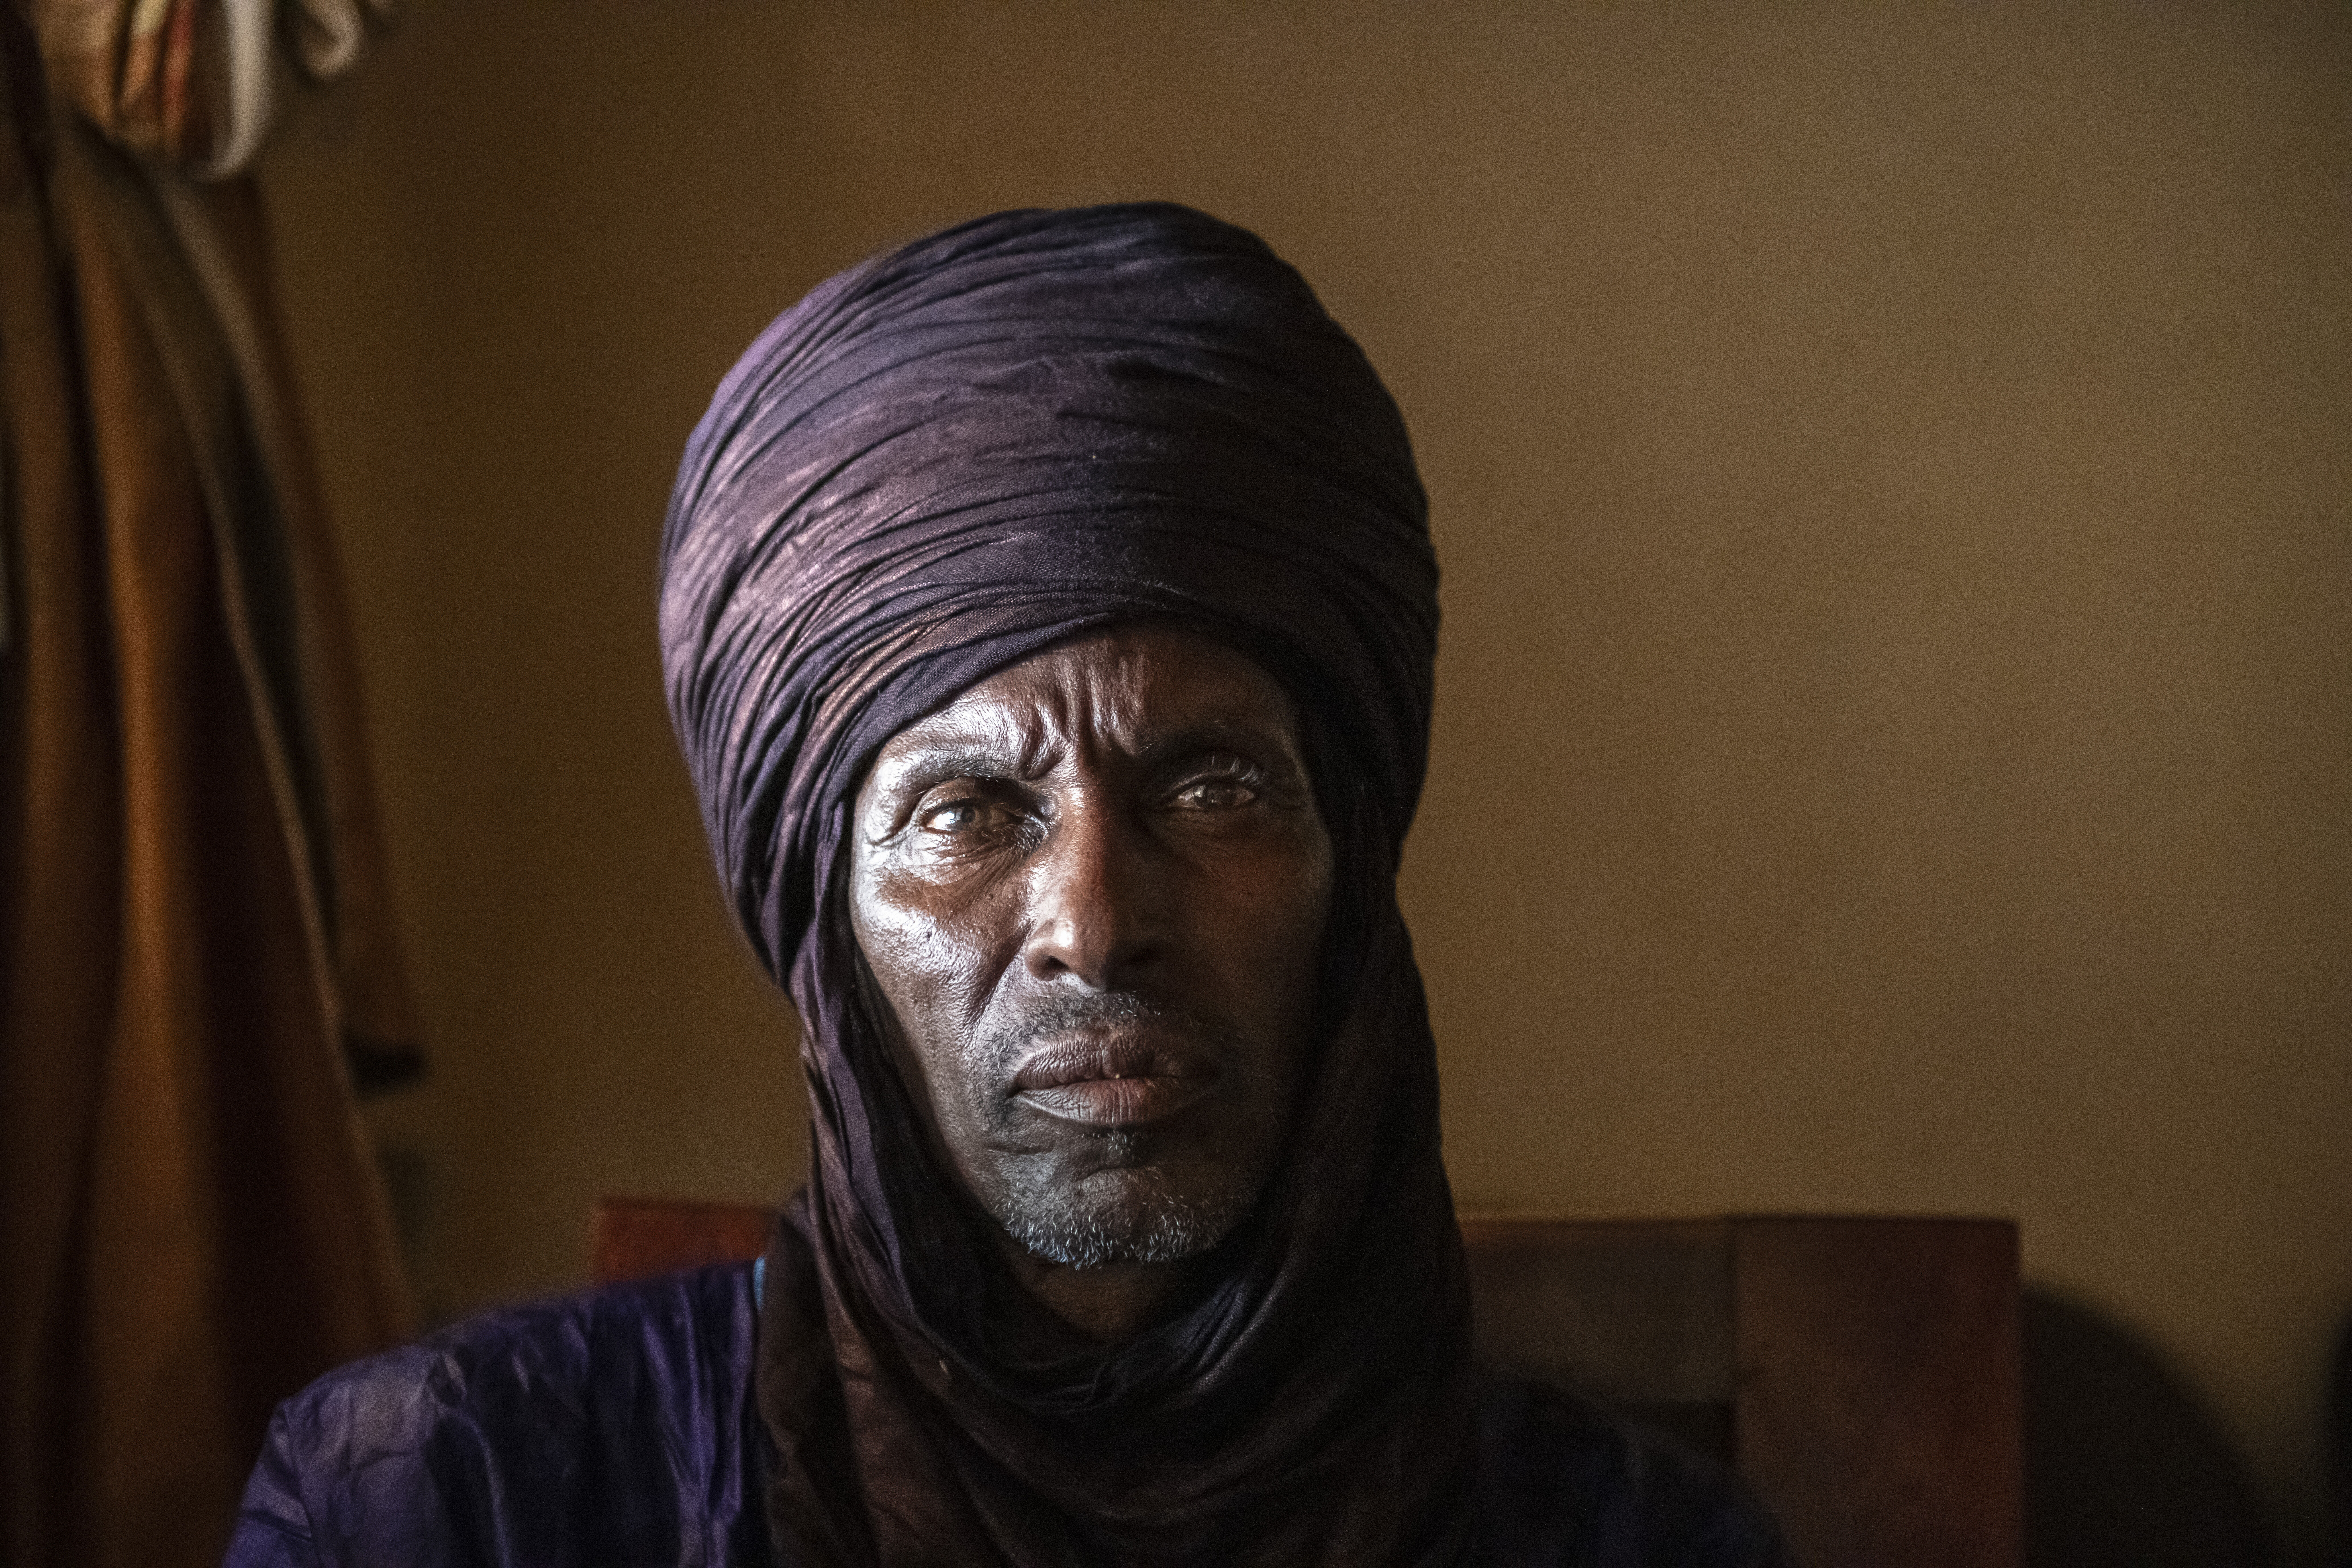 A Fulani man wearing a traditional head covering looks into the camera